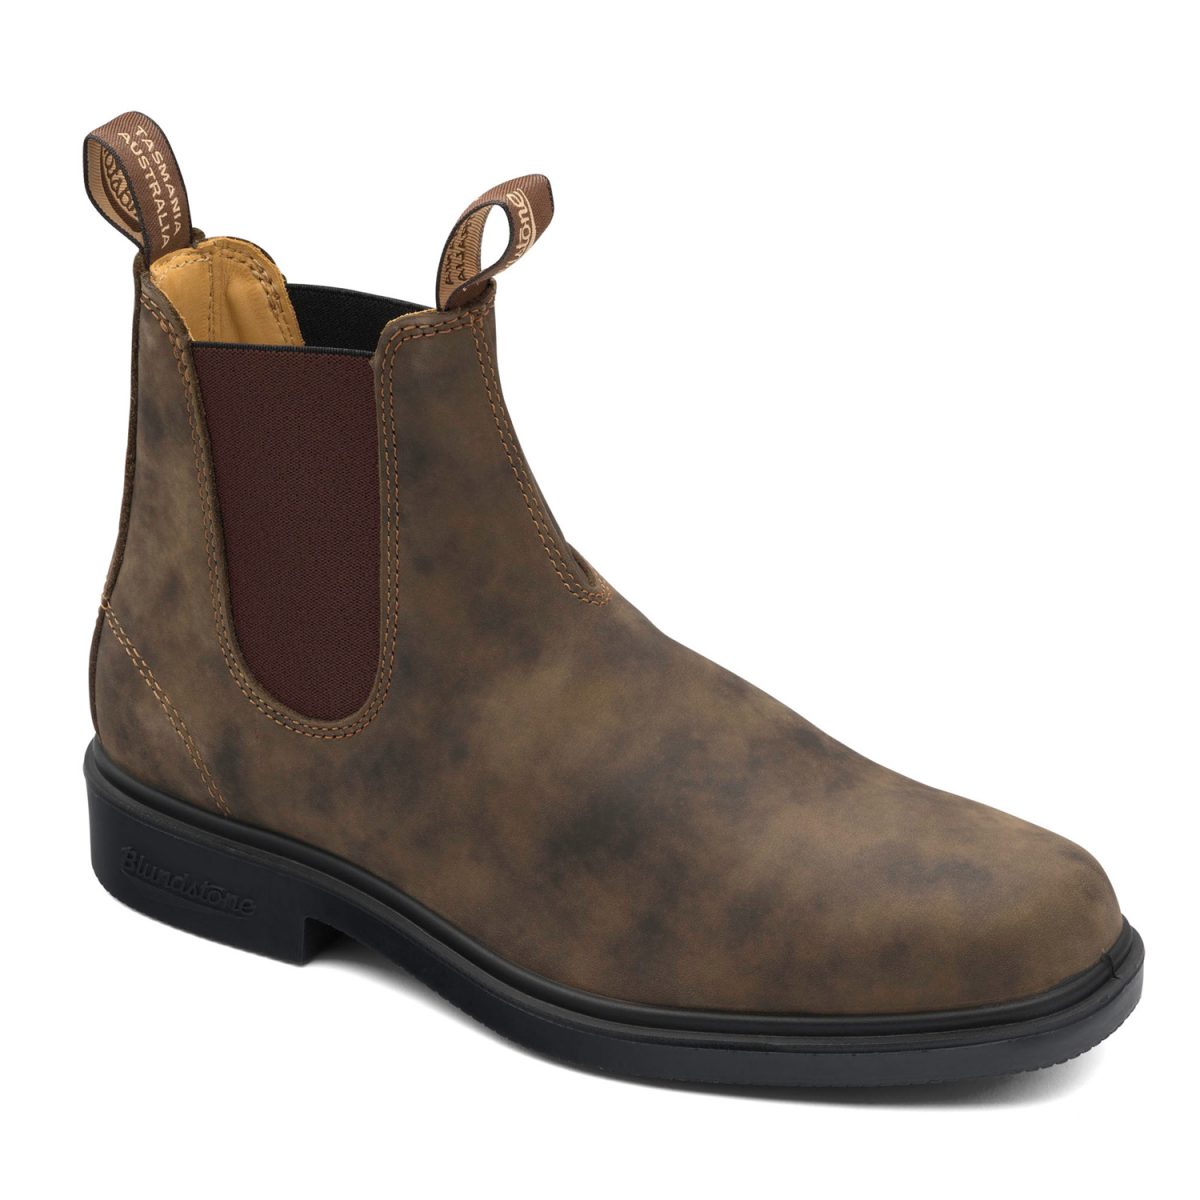 Blundstone 1306 Dress Boots - Lincoln Rural